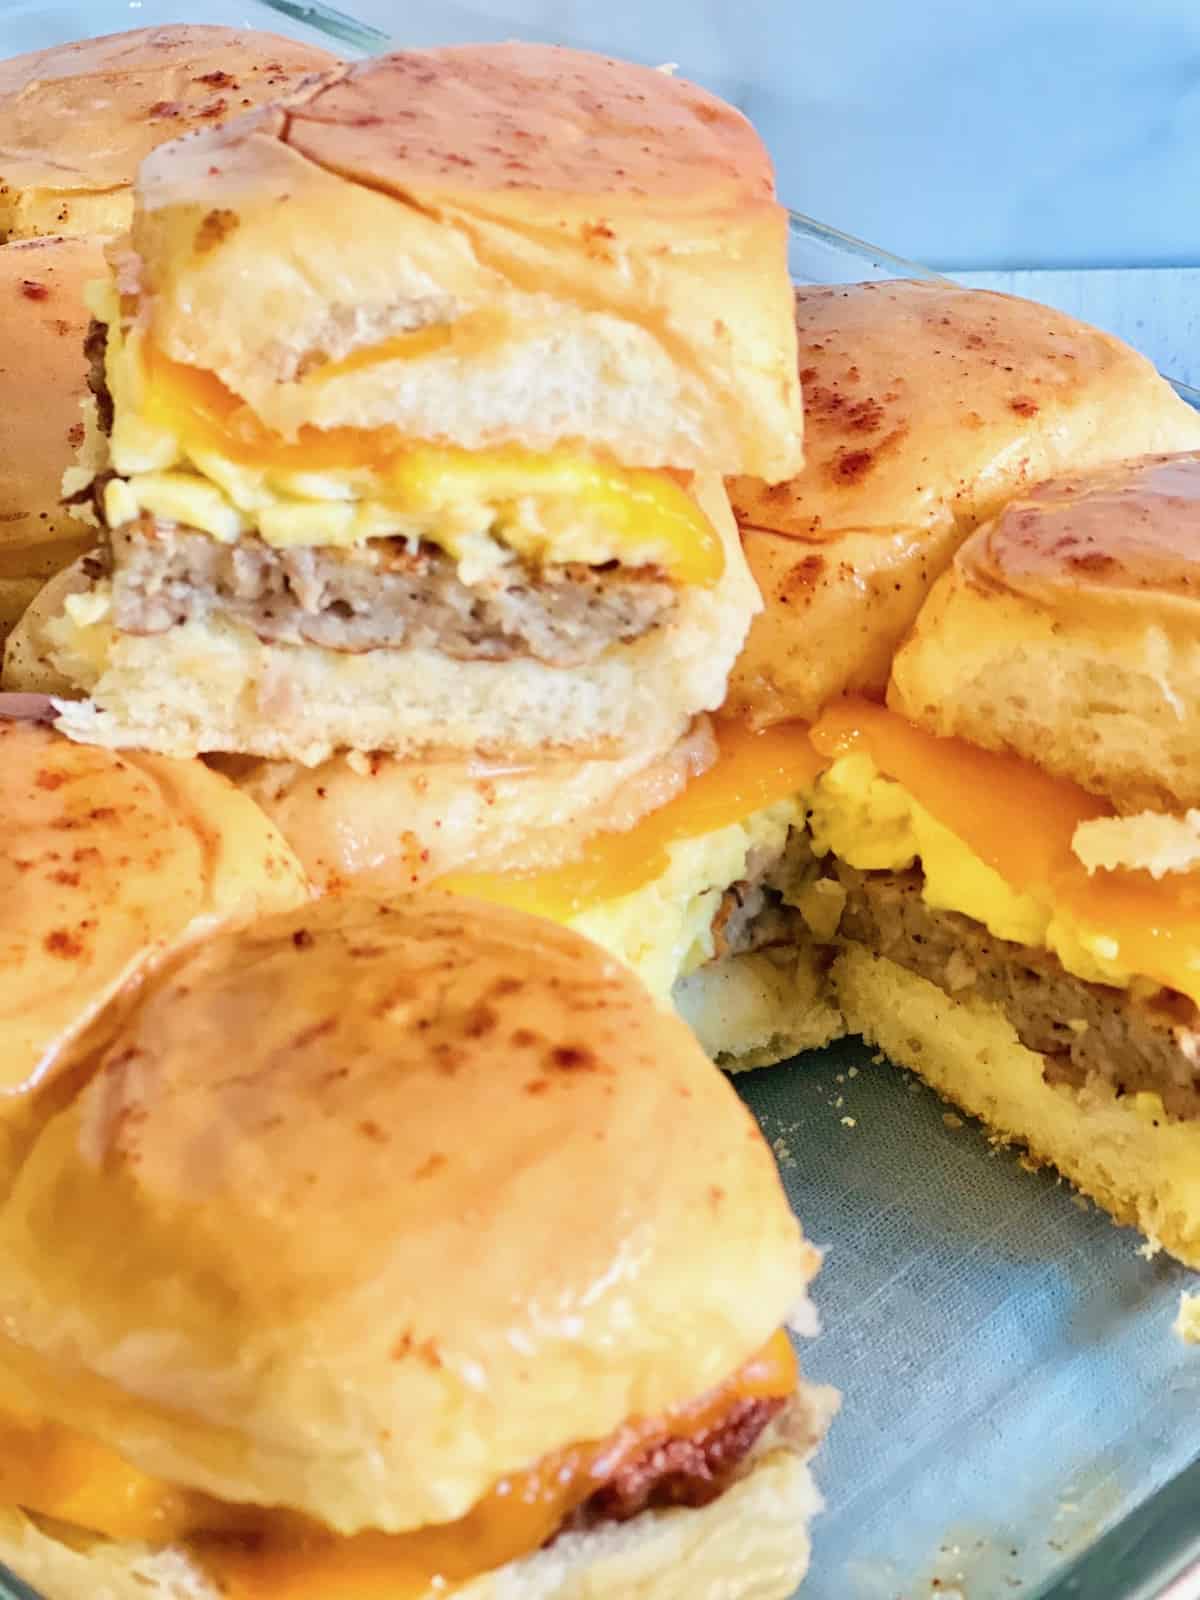 Sliders In a baking dish with one taken out and placed on top exposing the cheese egg and sausage layers.